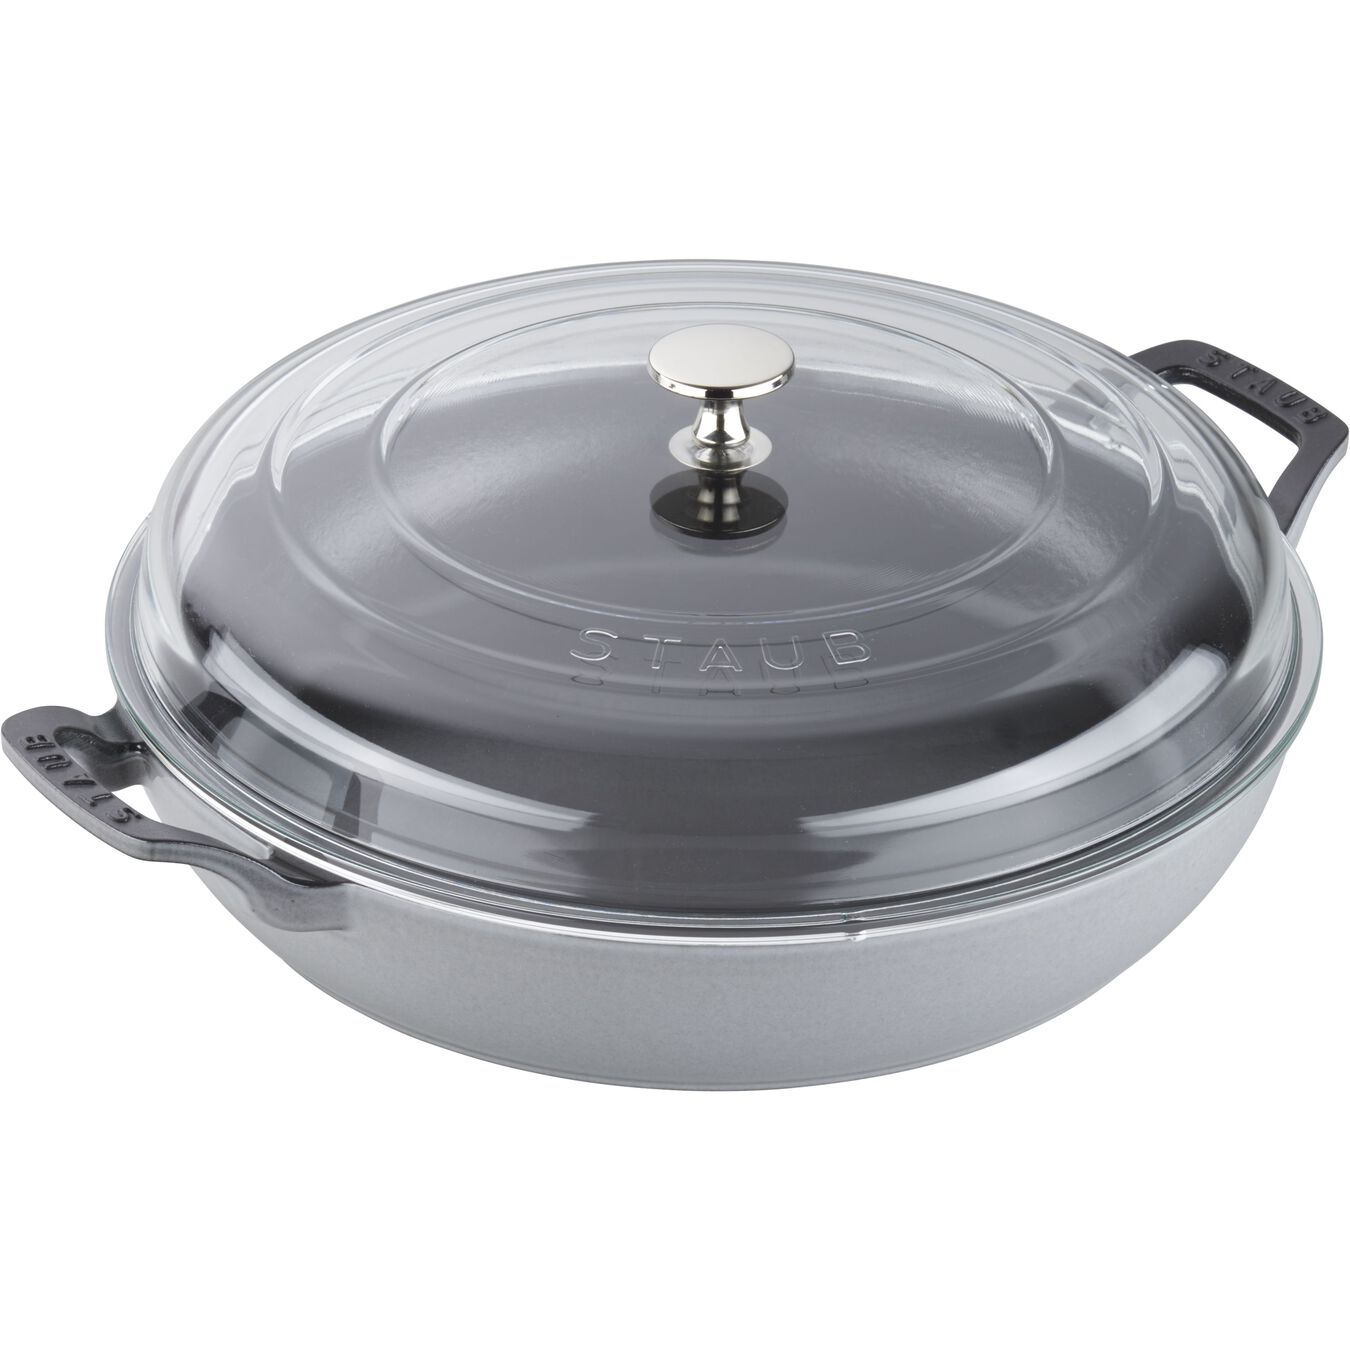 12-inch, Braiser with Glass Lid, graphite grey,,large 3